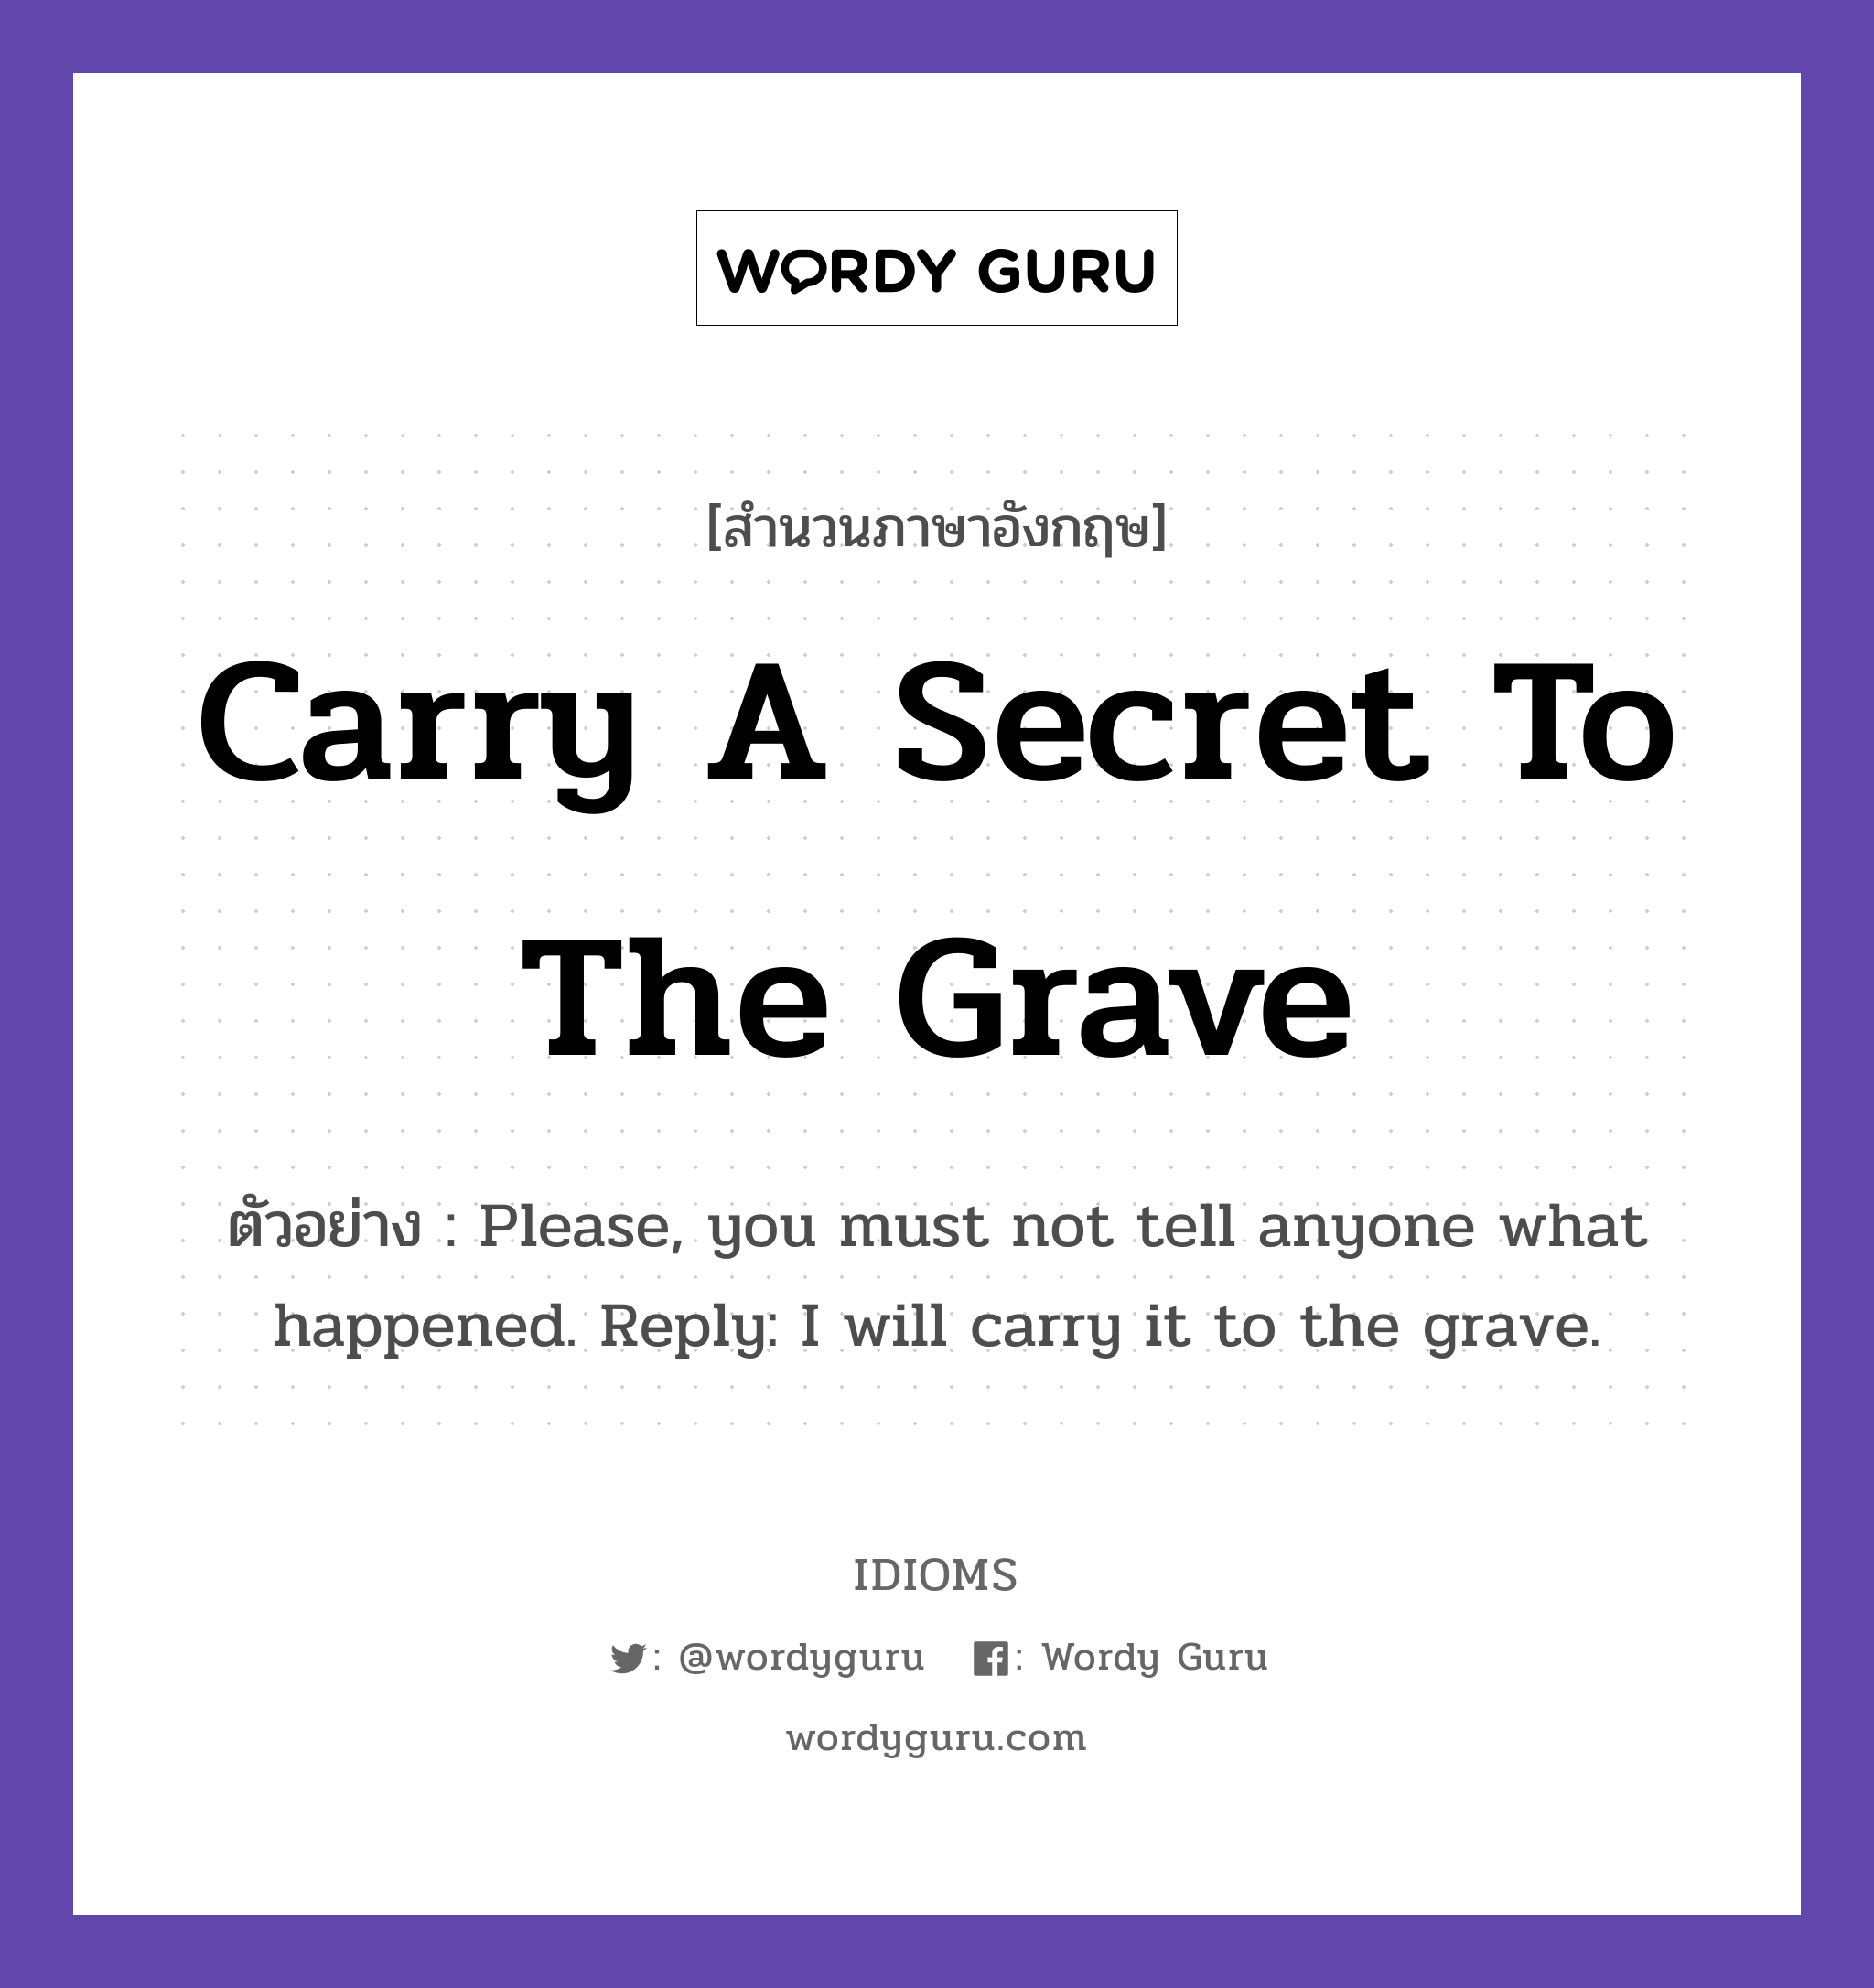 Carry A Secret To The Grave แปลว่า?, สำนวนภาษาอังกฤษ Carry A Secret To The Grave ตัวอย่าง Please, you must not tell anyone what happened. Reply: I will carry it to the grave.